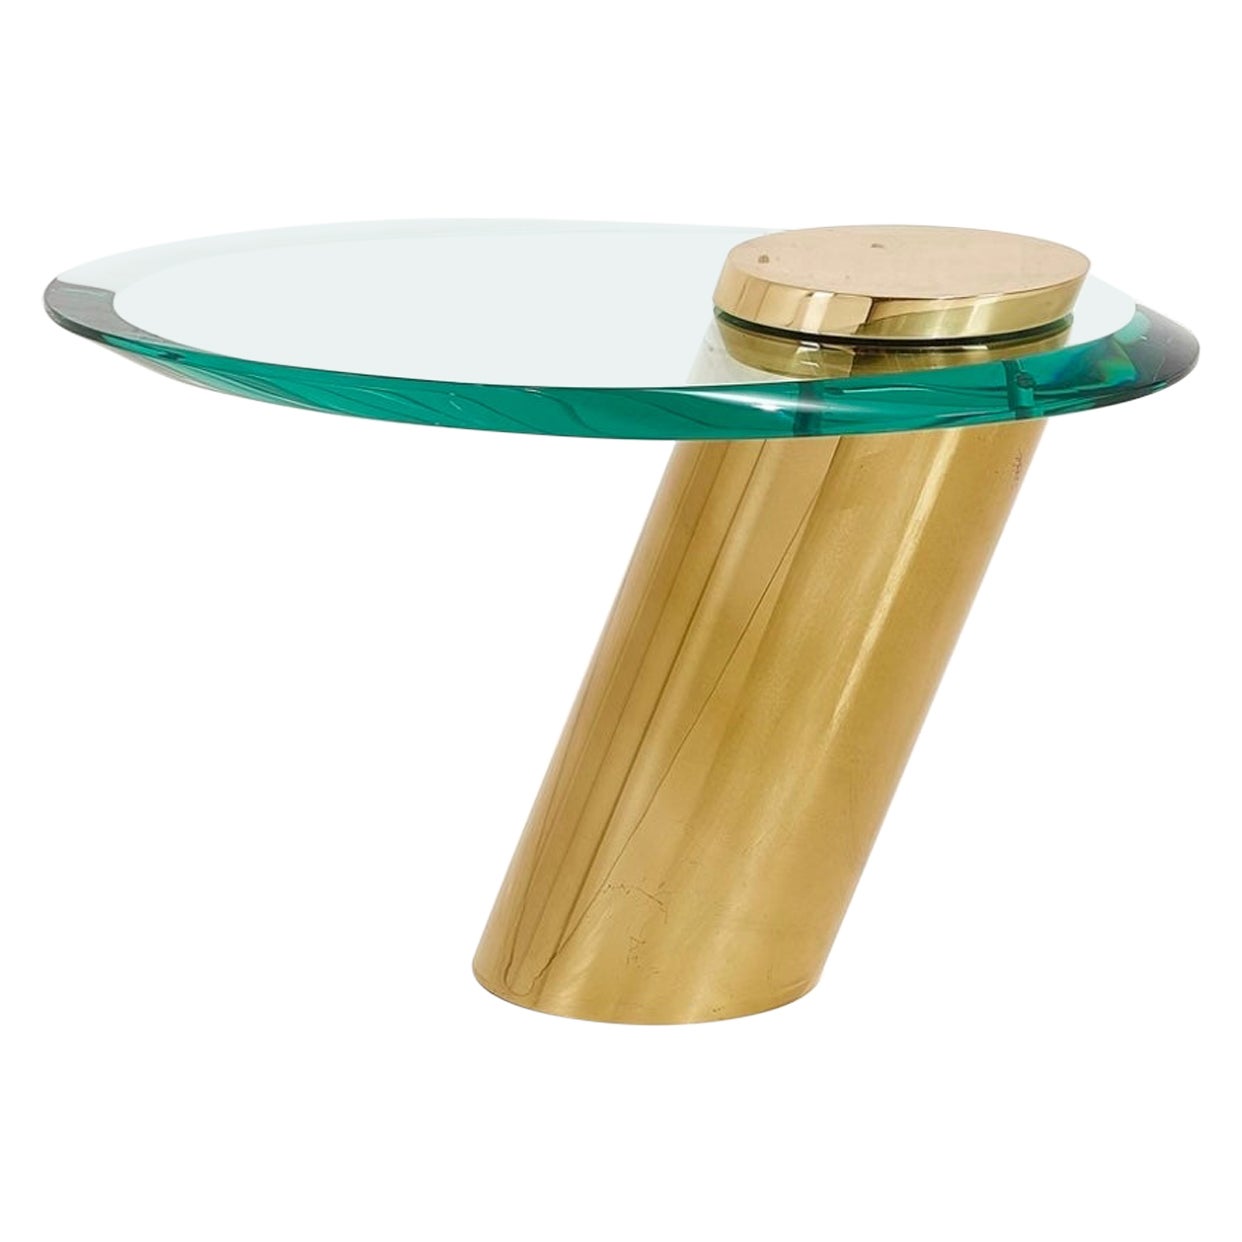 Karl Springer Brass with Cantilevered Glass Side Table, 1980